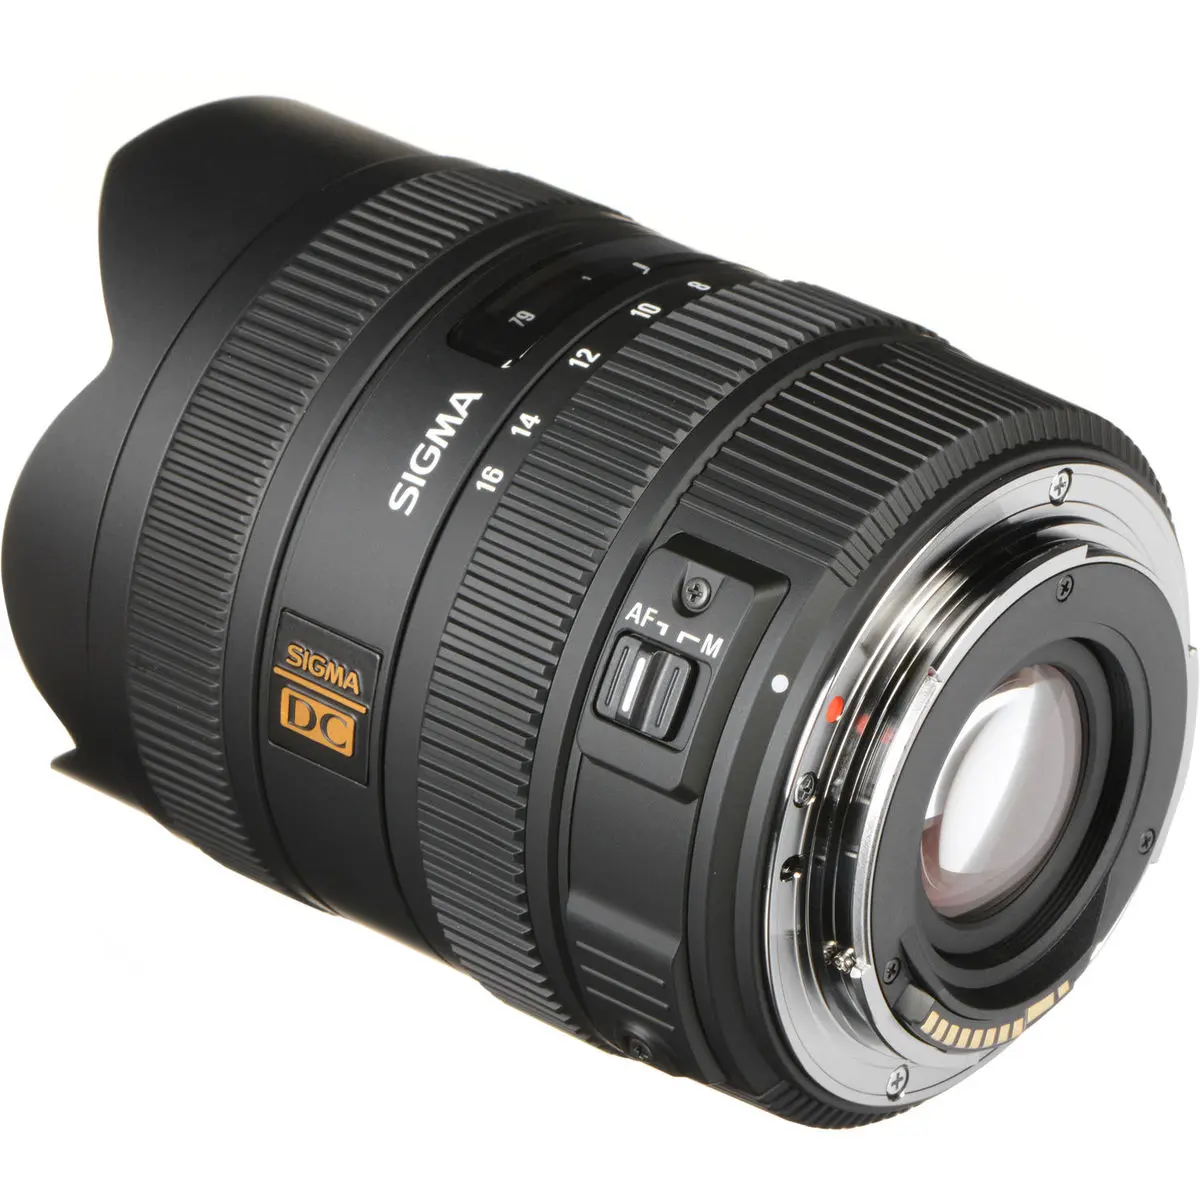 Sigma 8-16mm 8-16 mm f/4.5/F4.5-5.6 DC HSM for Canon - Camera